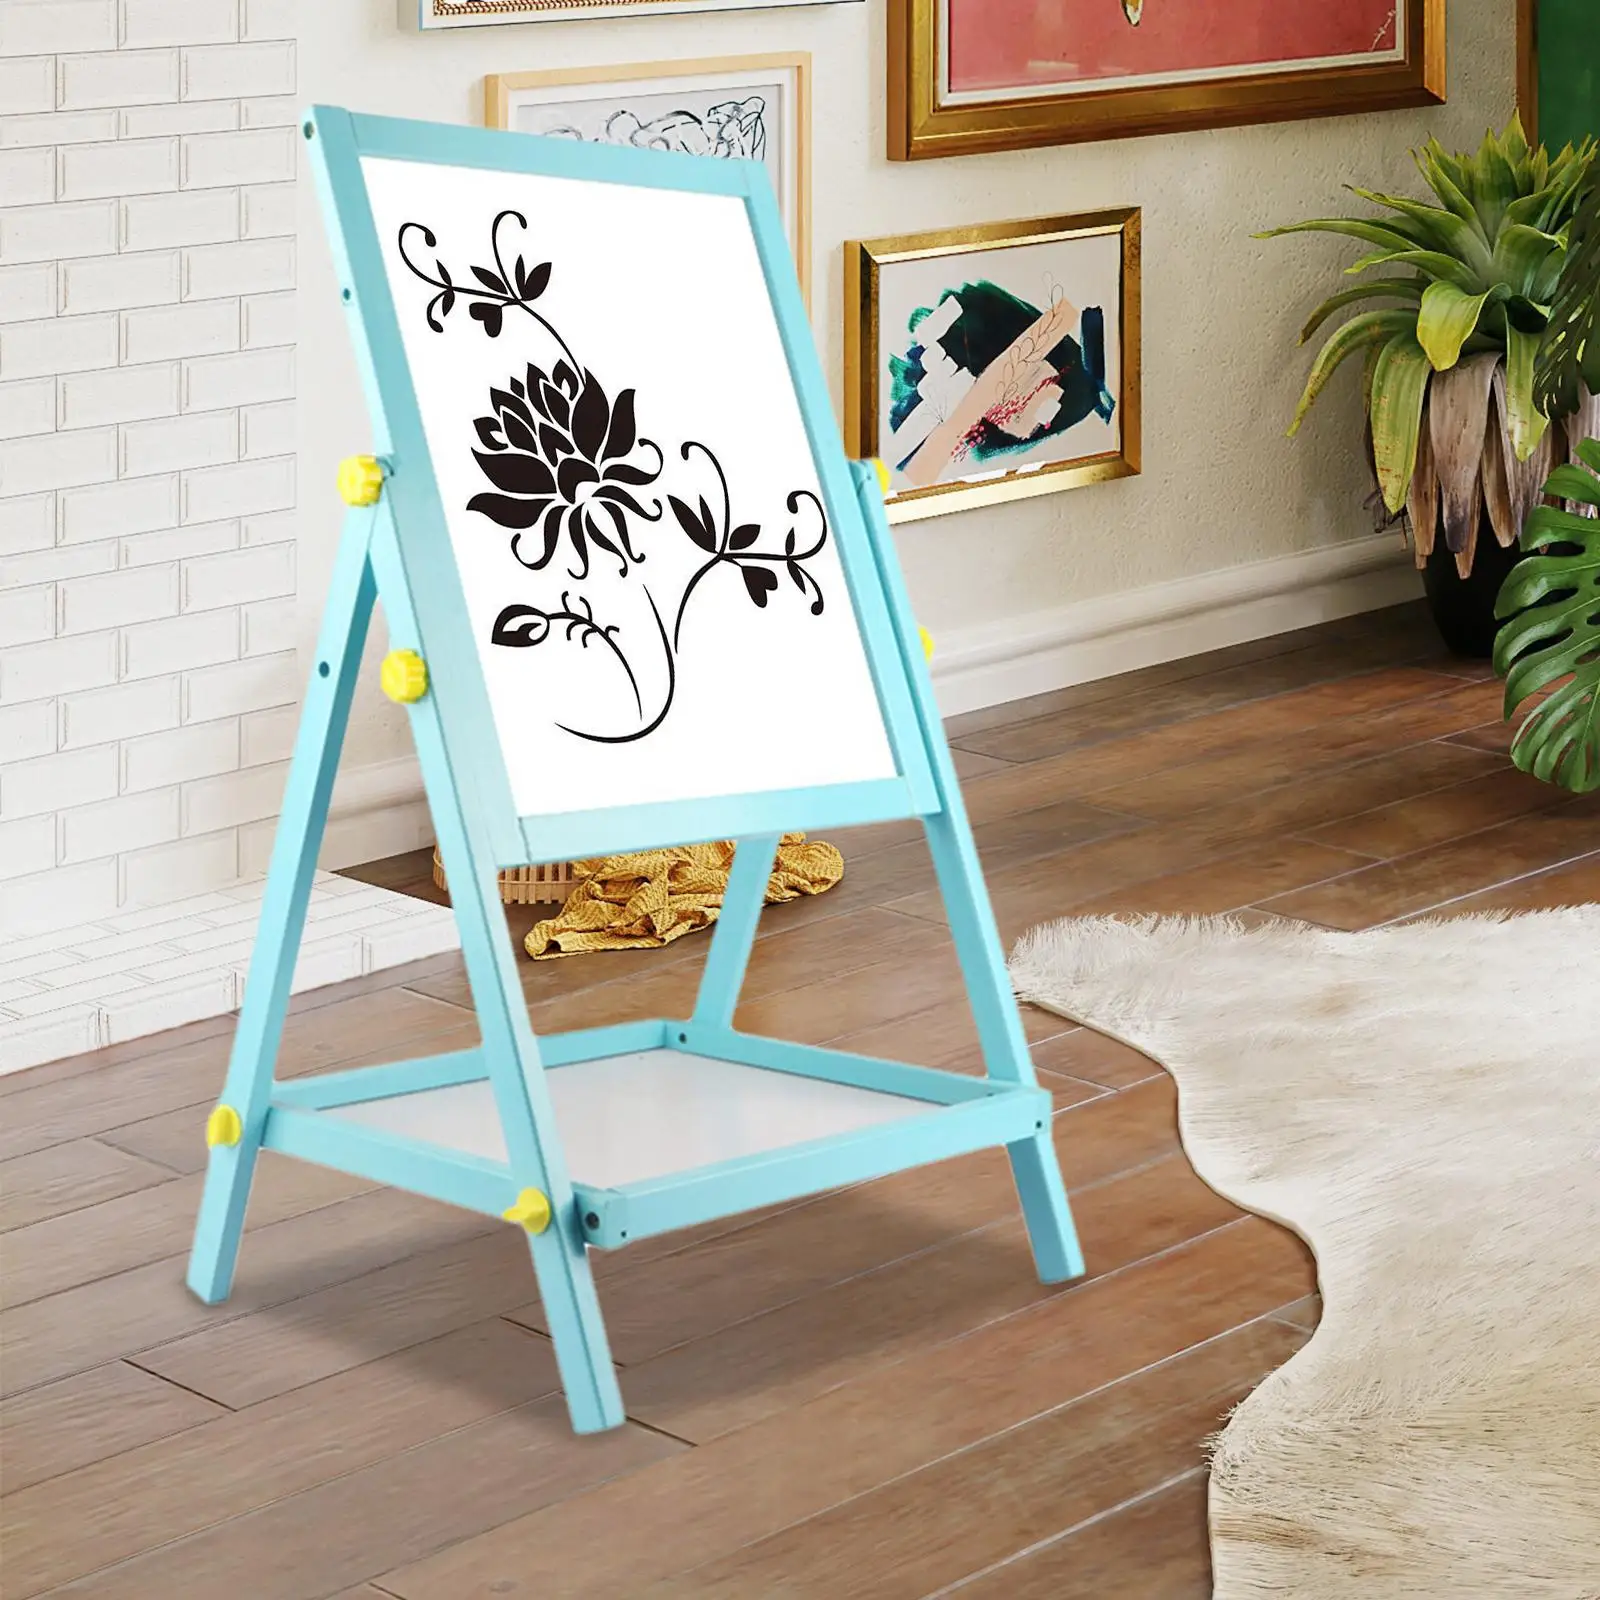 Standing Art Easel Double Sided Whiteboard Chalkboard Painting Accessories Wooden Learning Drawing Board for Children Girls Boys